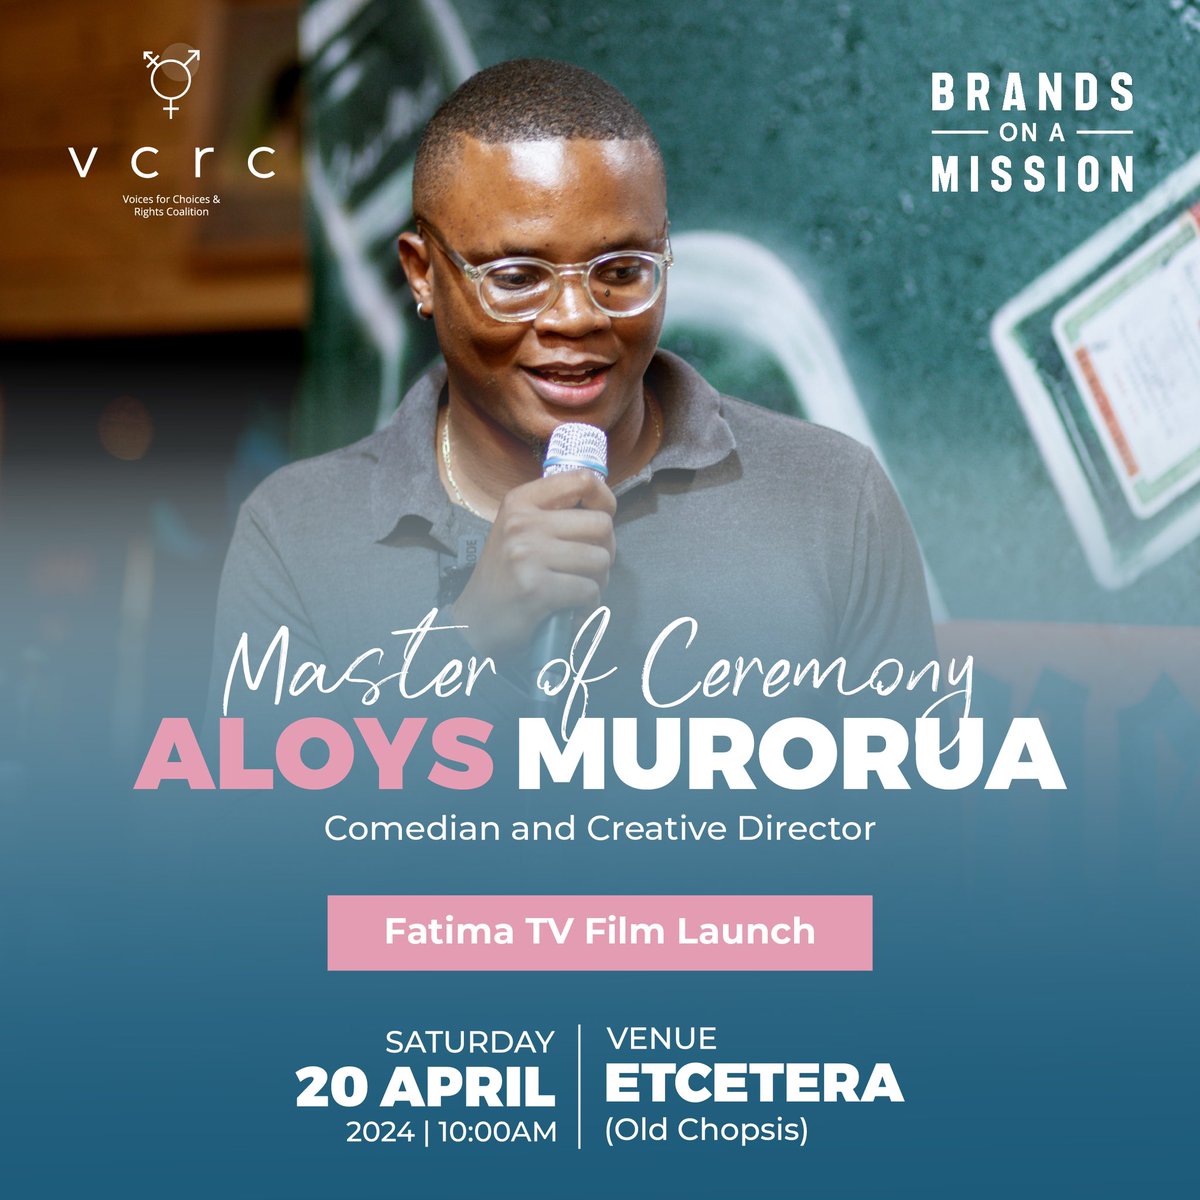 📣FATIMA TV FILM LAUNCH📣 MC. COMEDIAN. CREATIVE DIRECTOR, Aloys Murorua, (@axarob_ ) will be hosting us this Saturday. Have you registered yet? Register to attend via this link: forms.gle/oMDBYZbEByFx5A…. #FatimaTV #FilmLaunch #VCRC #BOAM